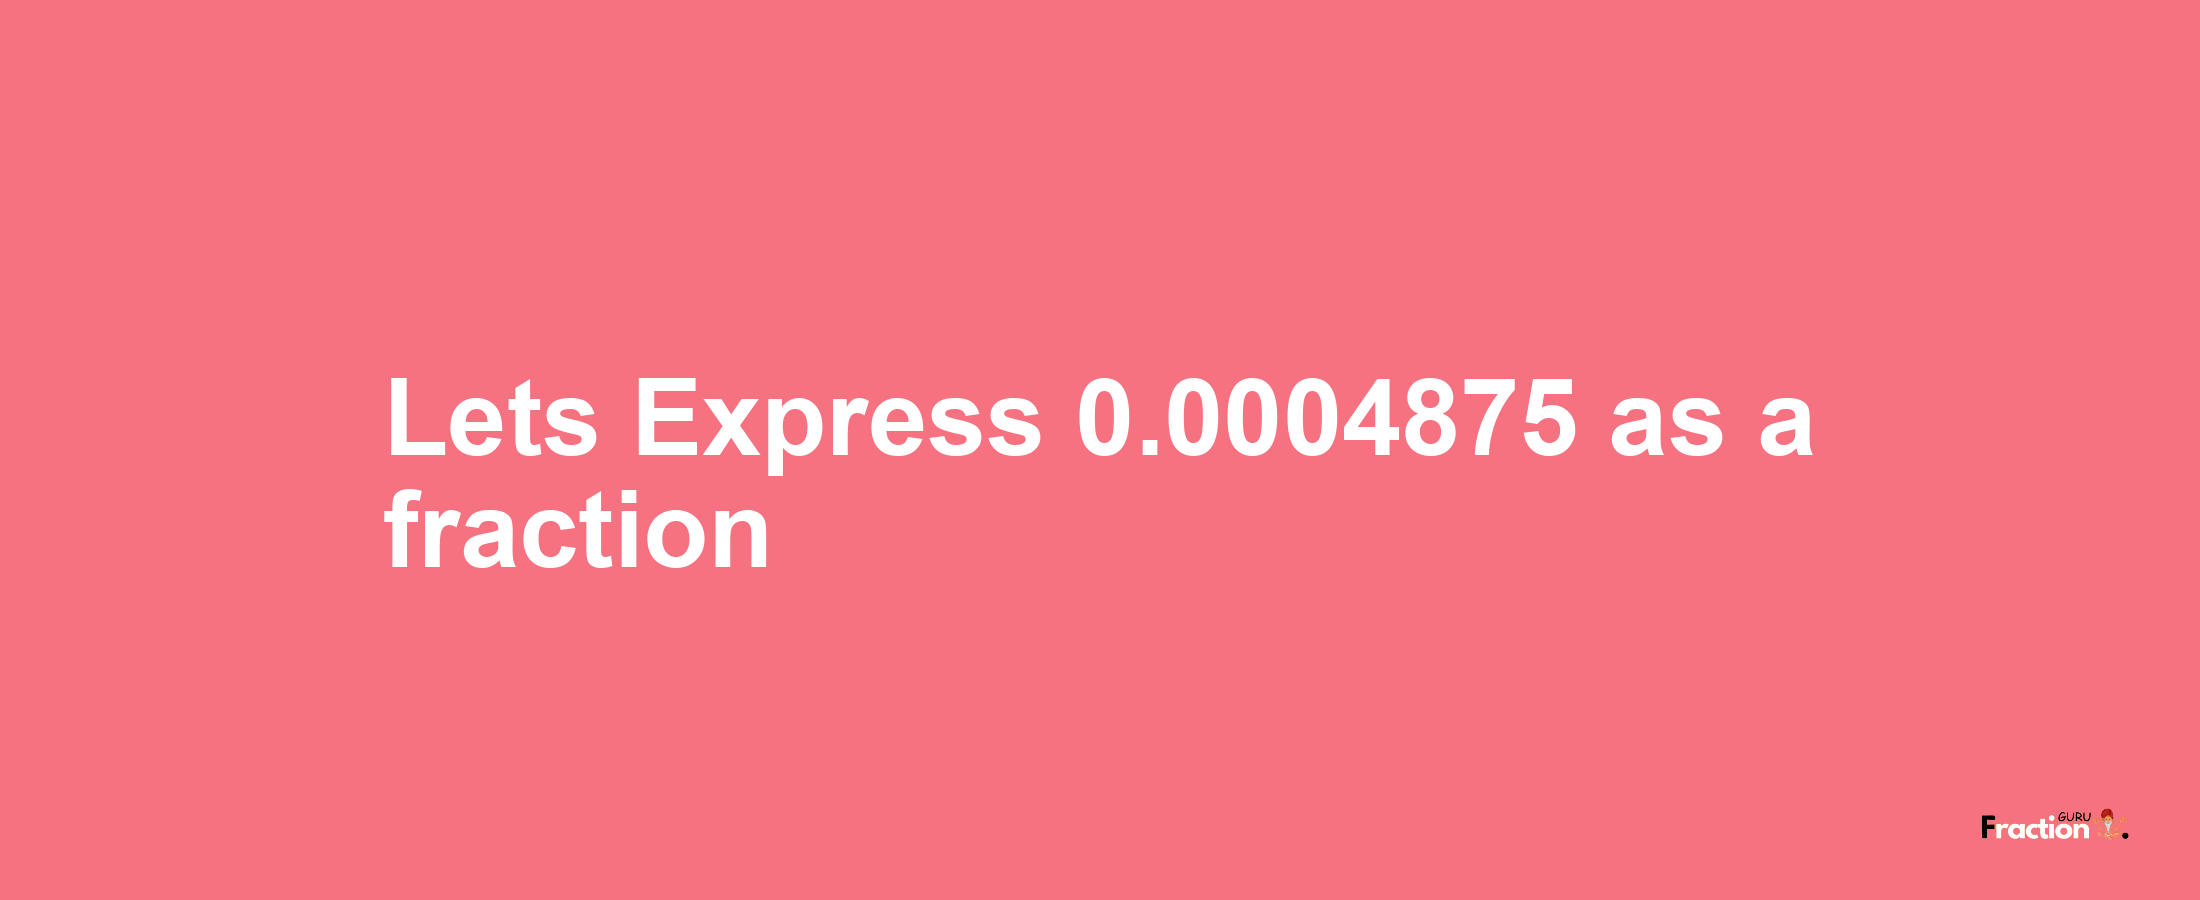 Lets Express 0.0004875 as afraction